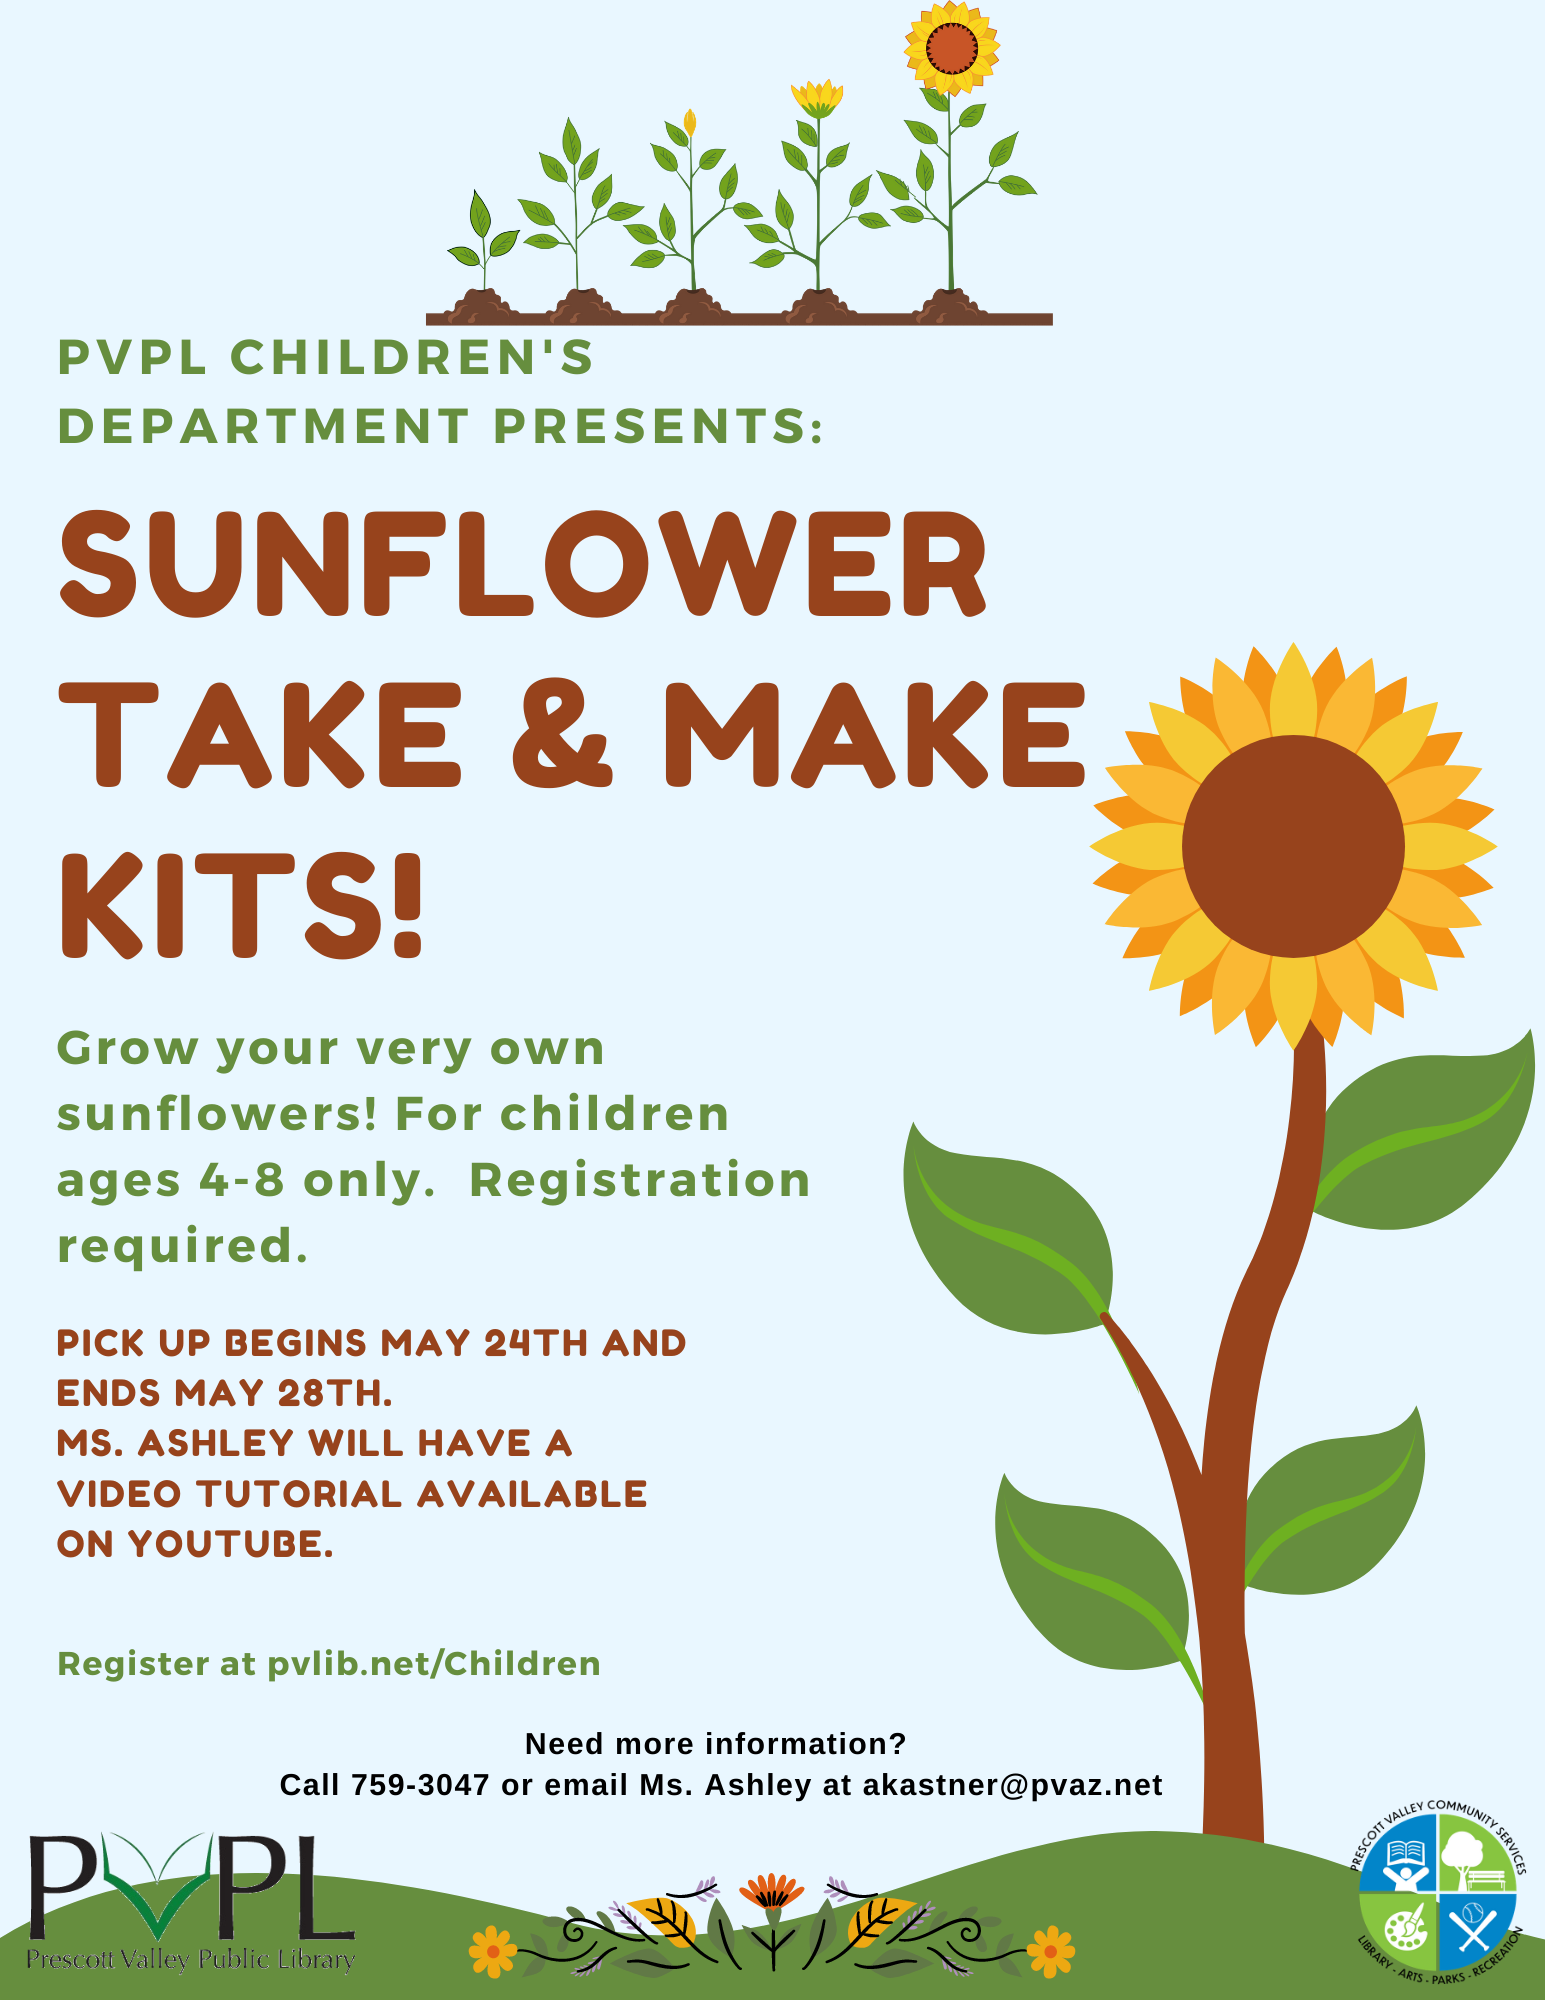 Sunflower Take & Make Kits-Pick-up available May 24th through May 28th. Registration required.